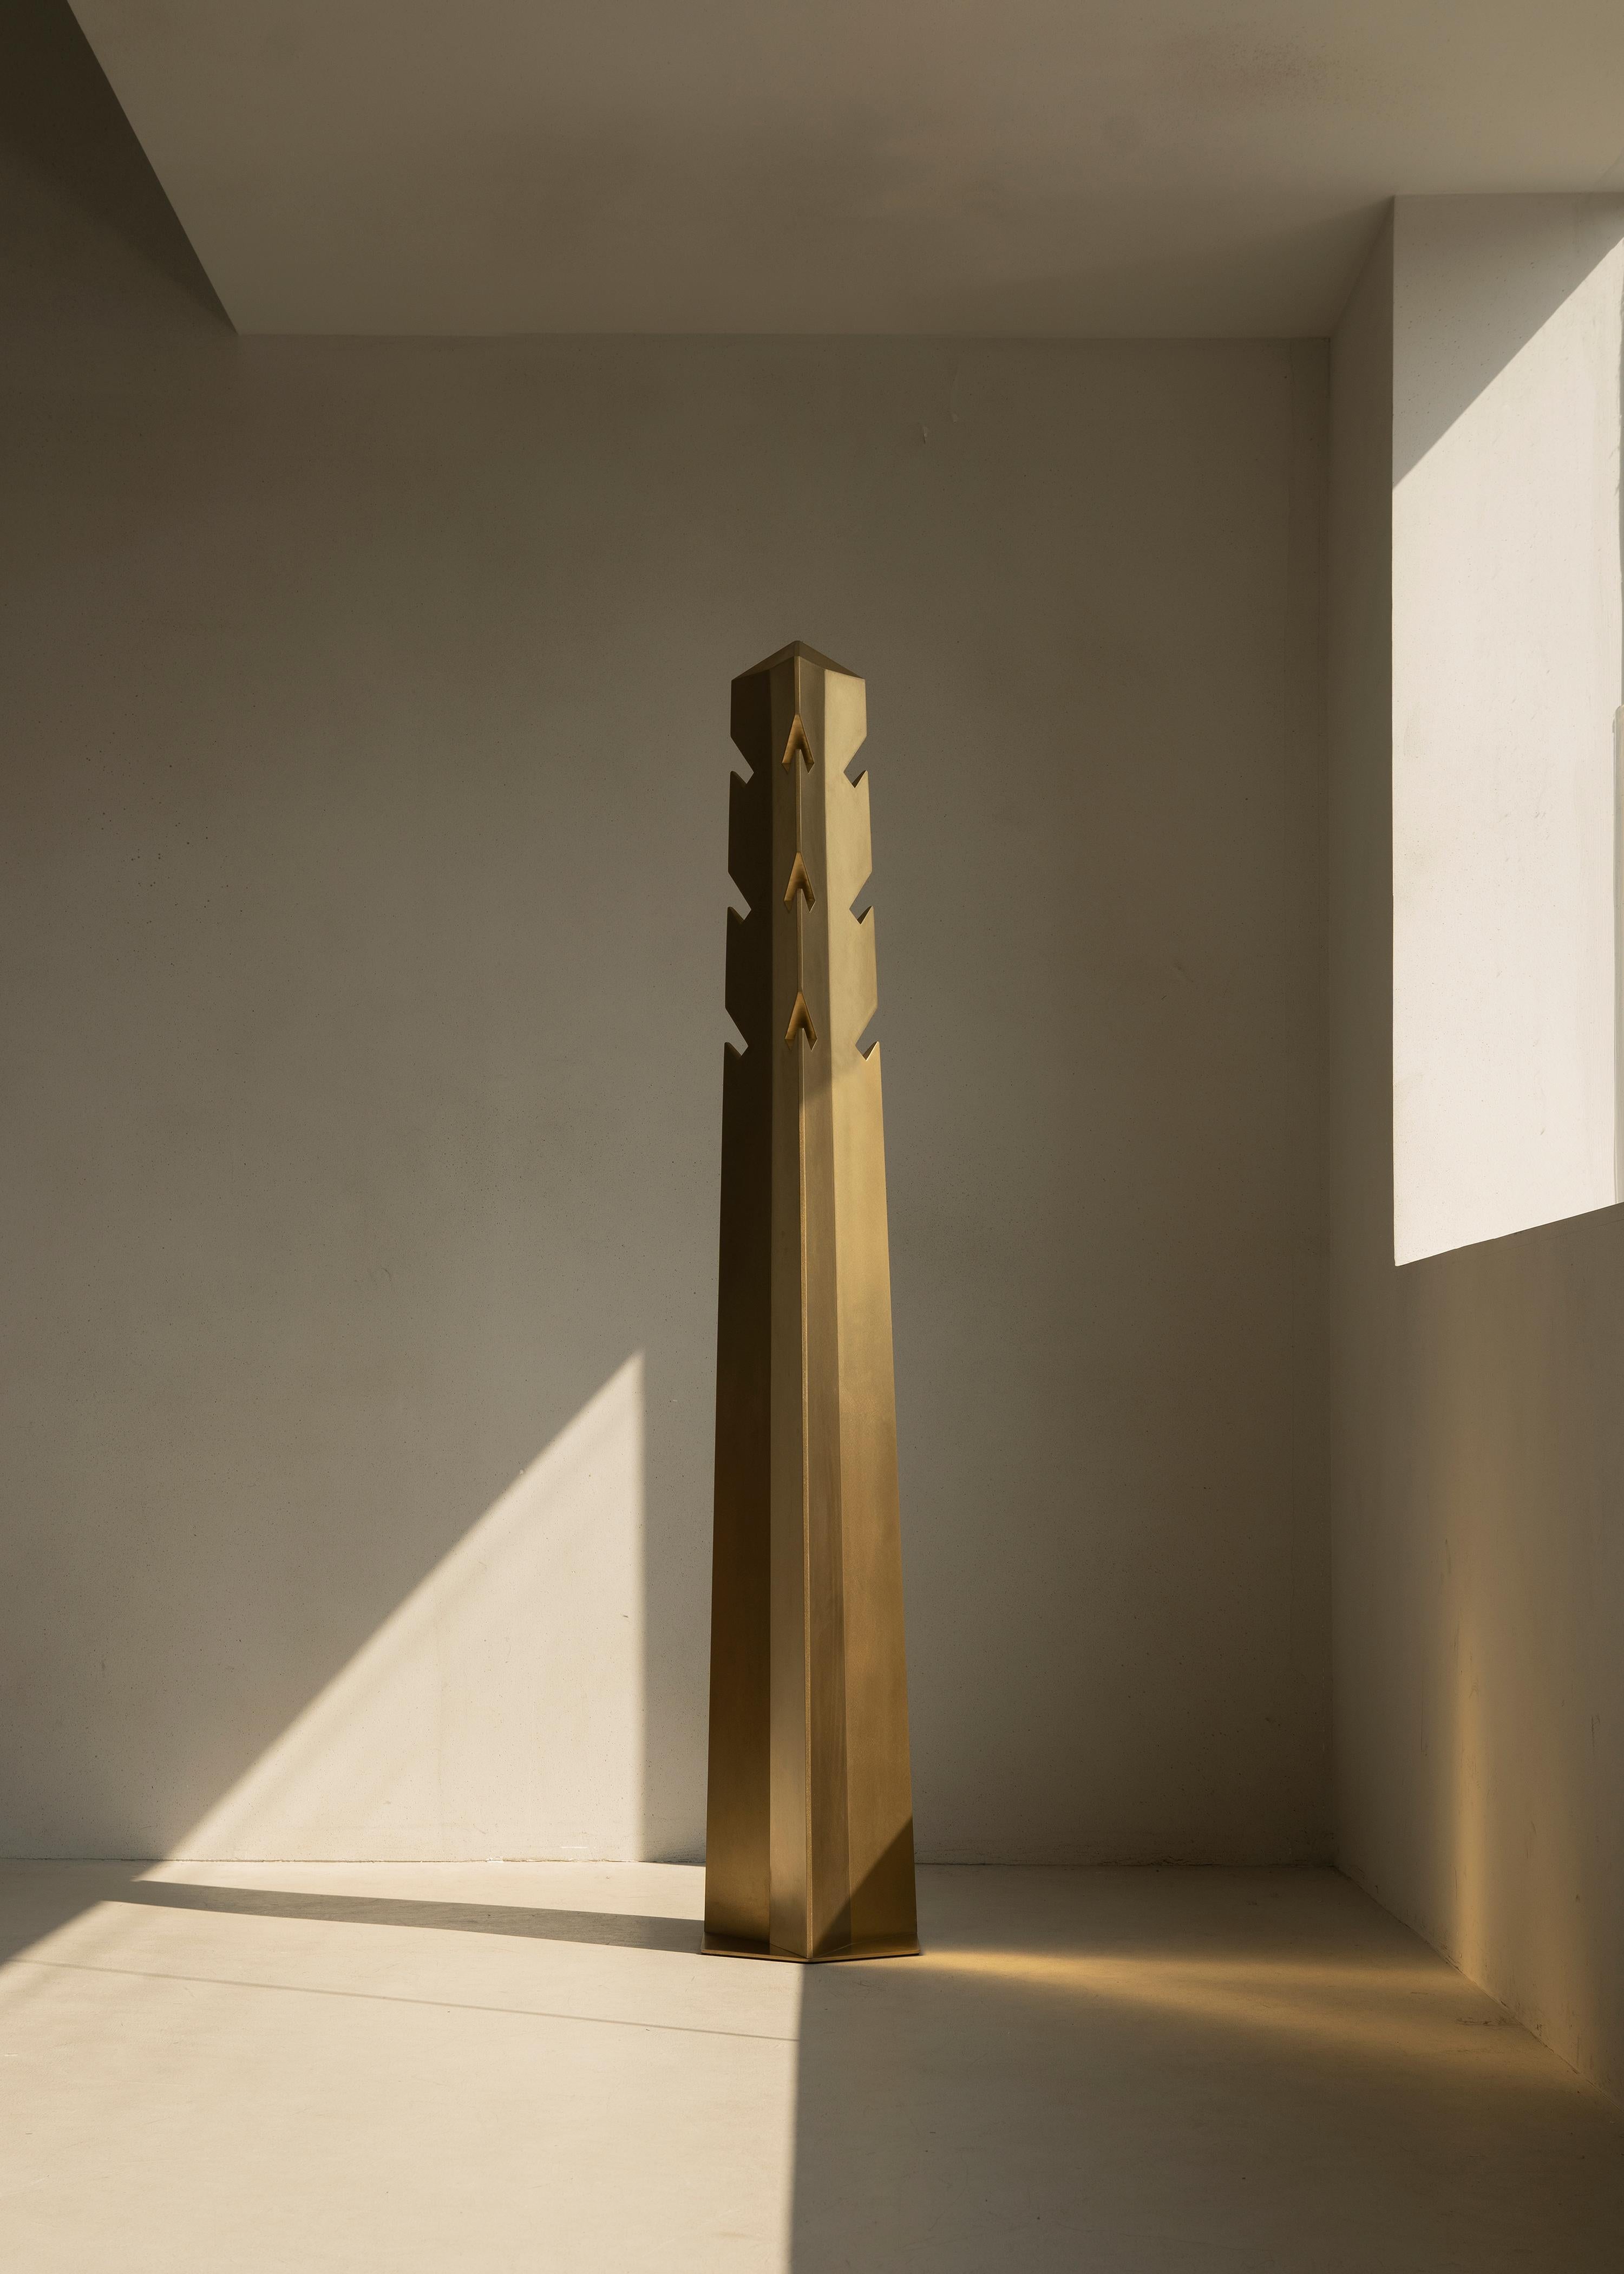 Obelisk 01 clothing stand by Sing Chan 
Dimensions: D 36 x H 190 cm
Materials: Stainless steel, electroplating.

Greek civilization and art were greatly influenced by ancient Egyptian culture, which radiated throughout the European continent. It can